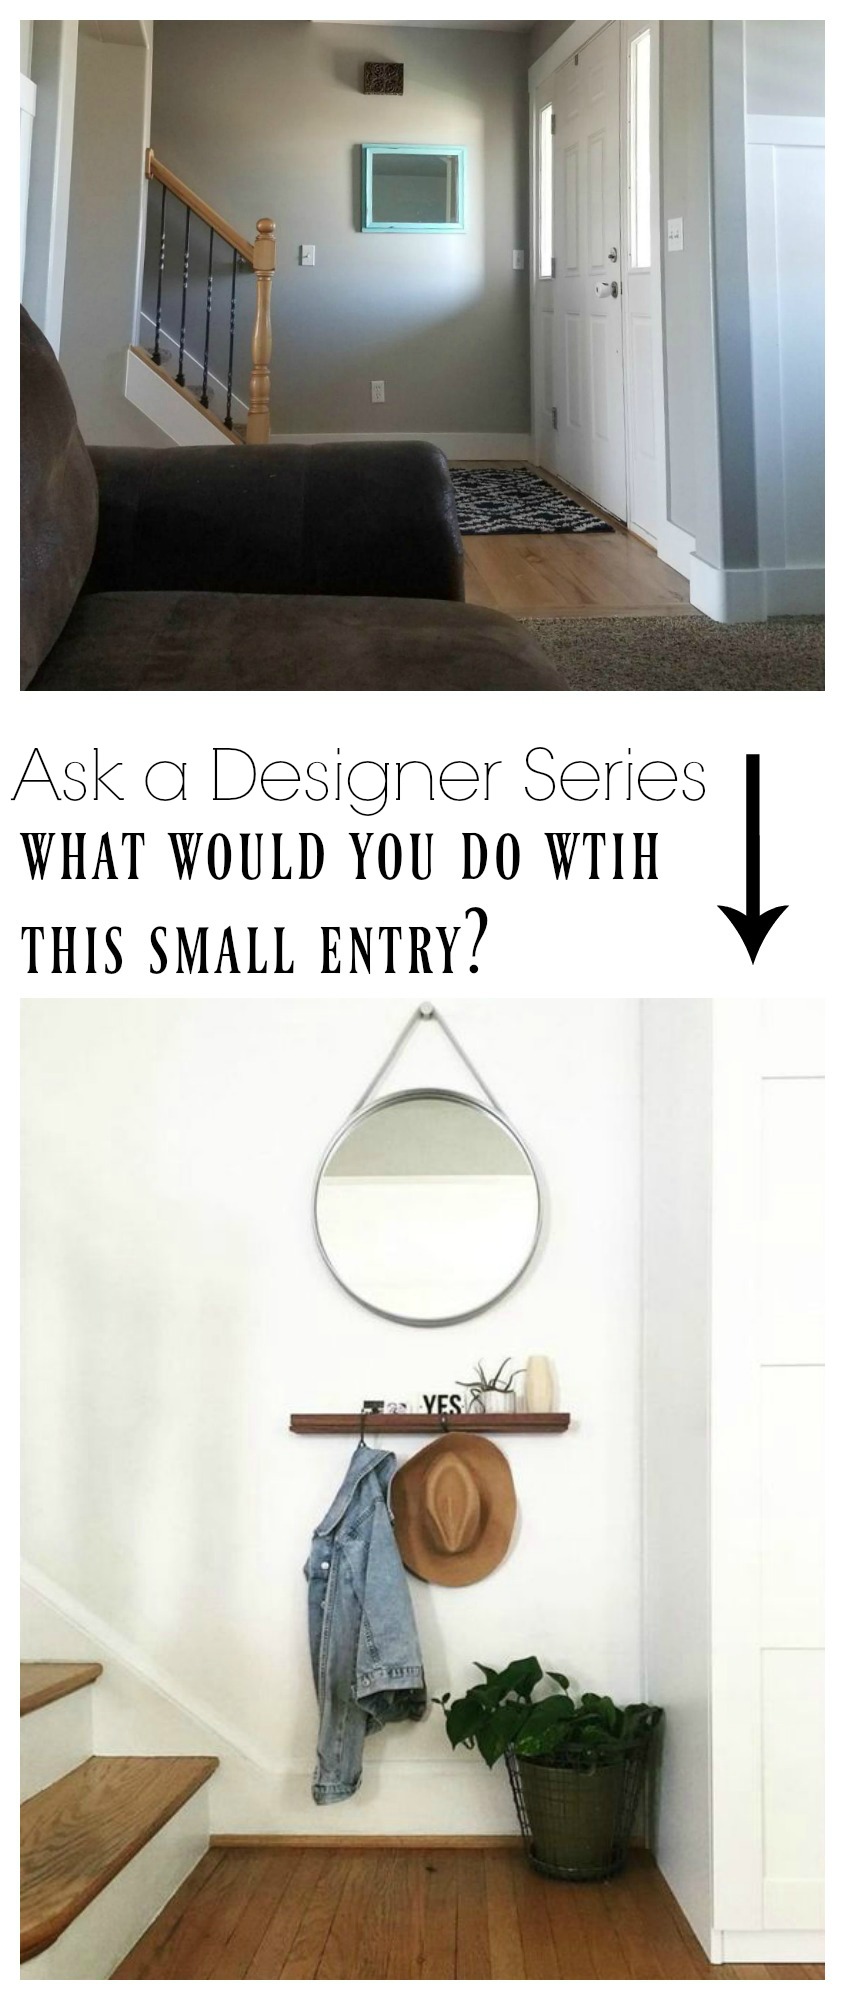 Ask a Designer Series- What would you do with this small entry?